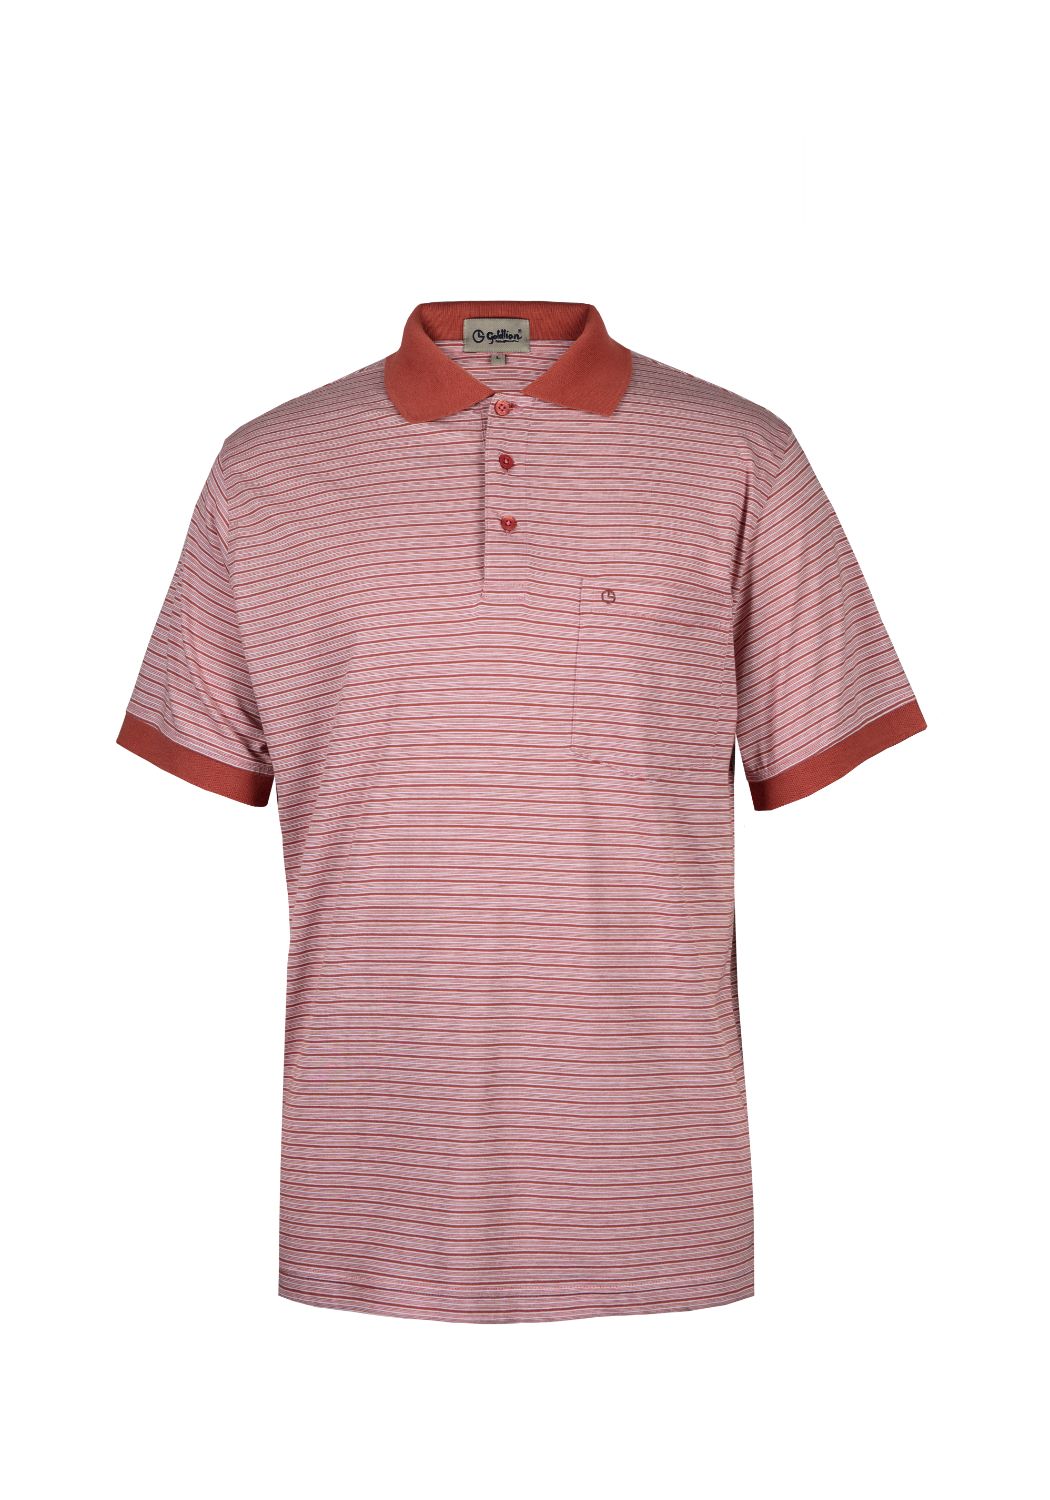 Goldlion Regular Fit Cotton Polo Tee - Red Stripe (RPS192CO22R-20)